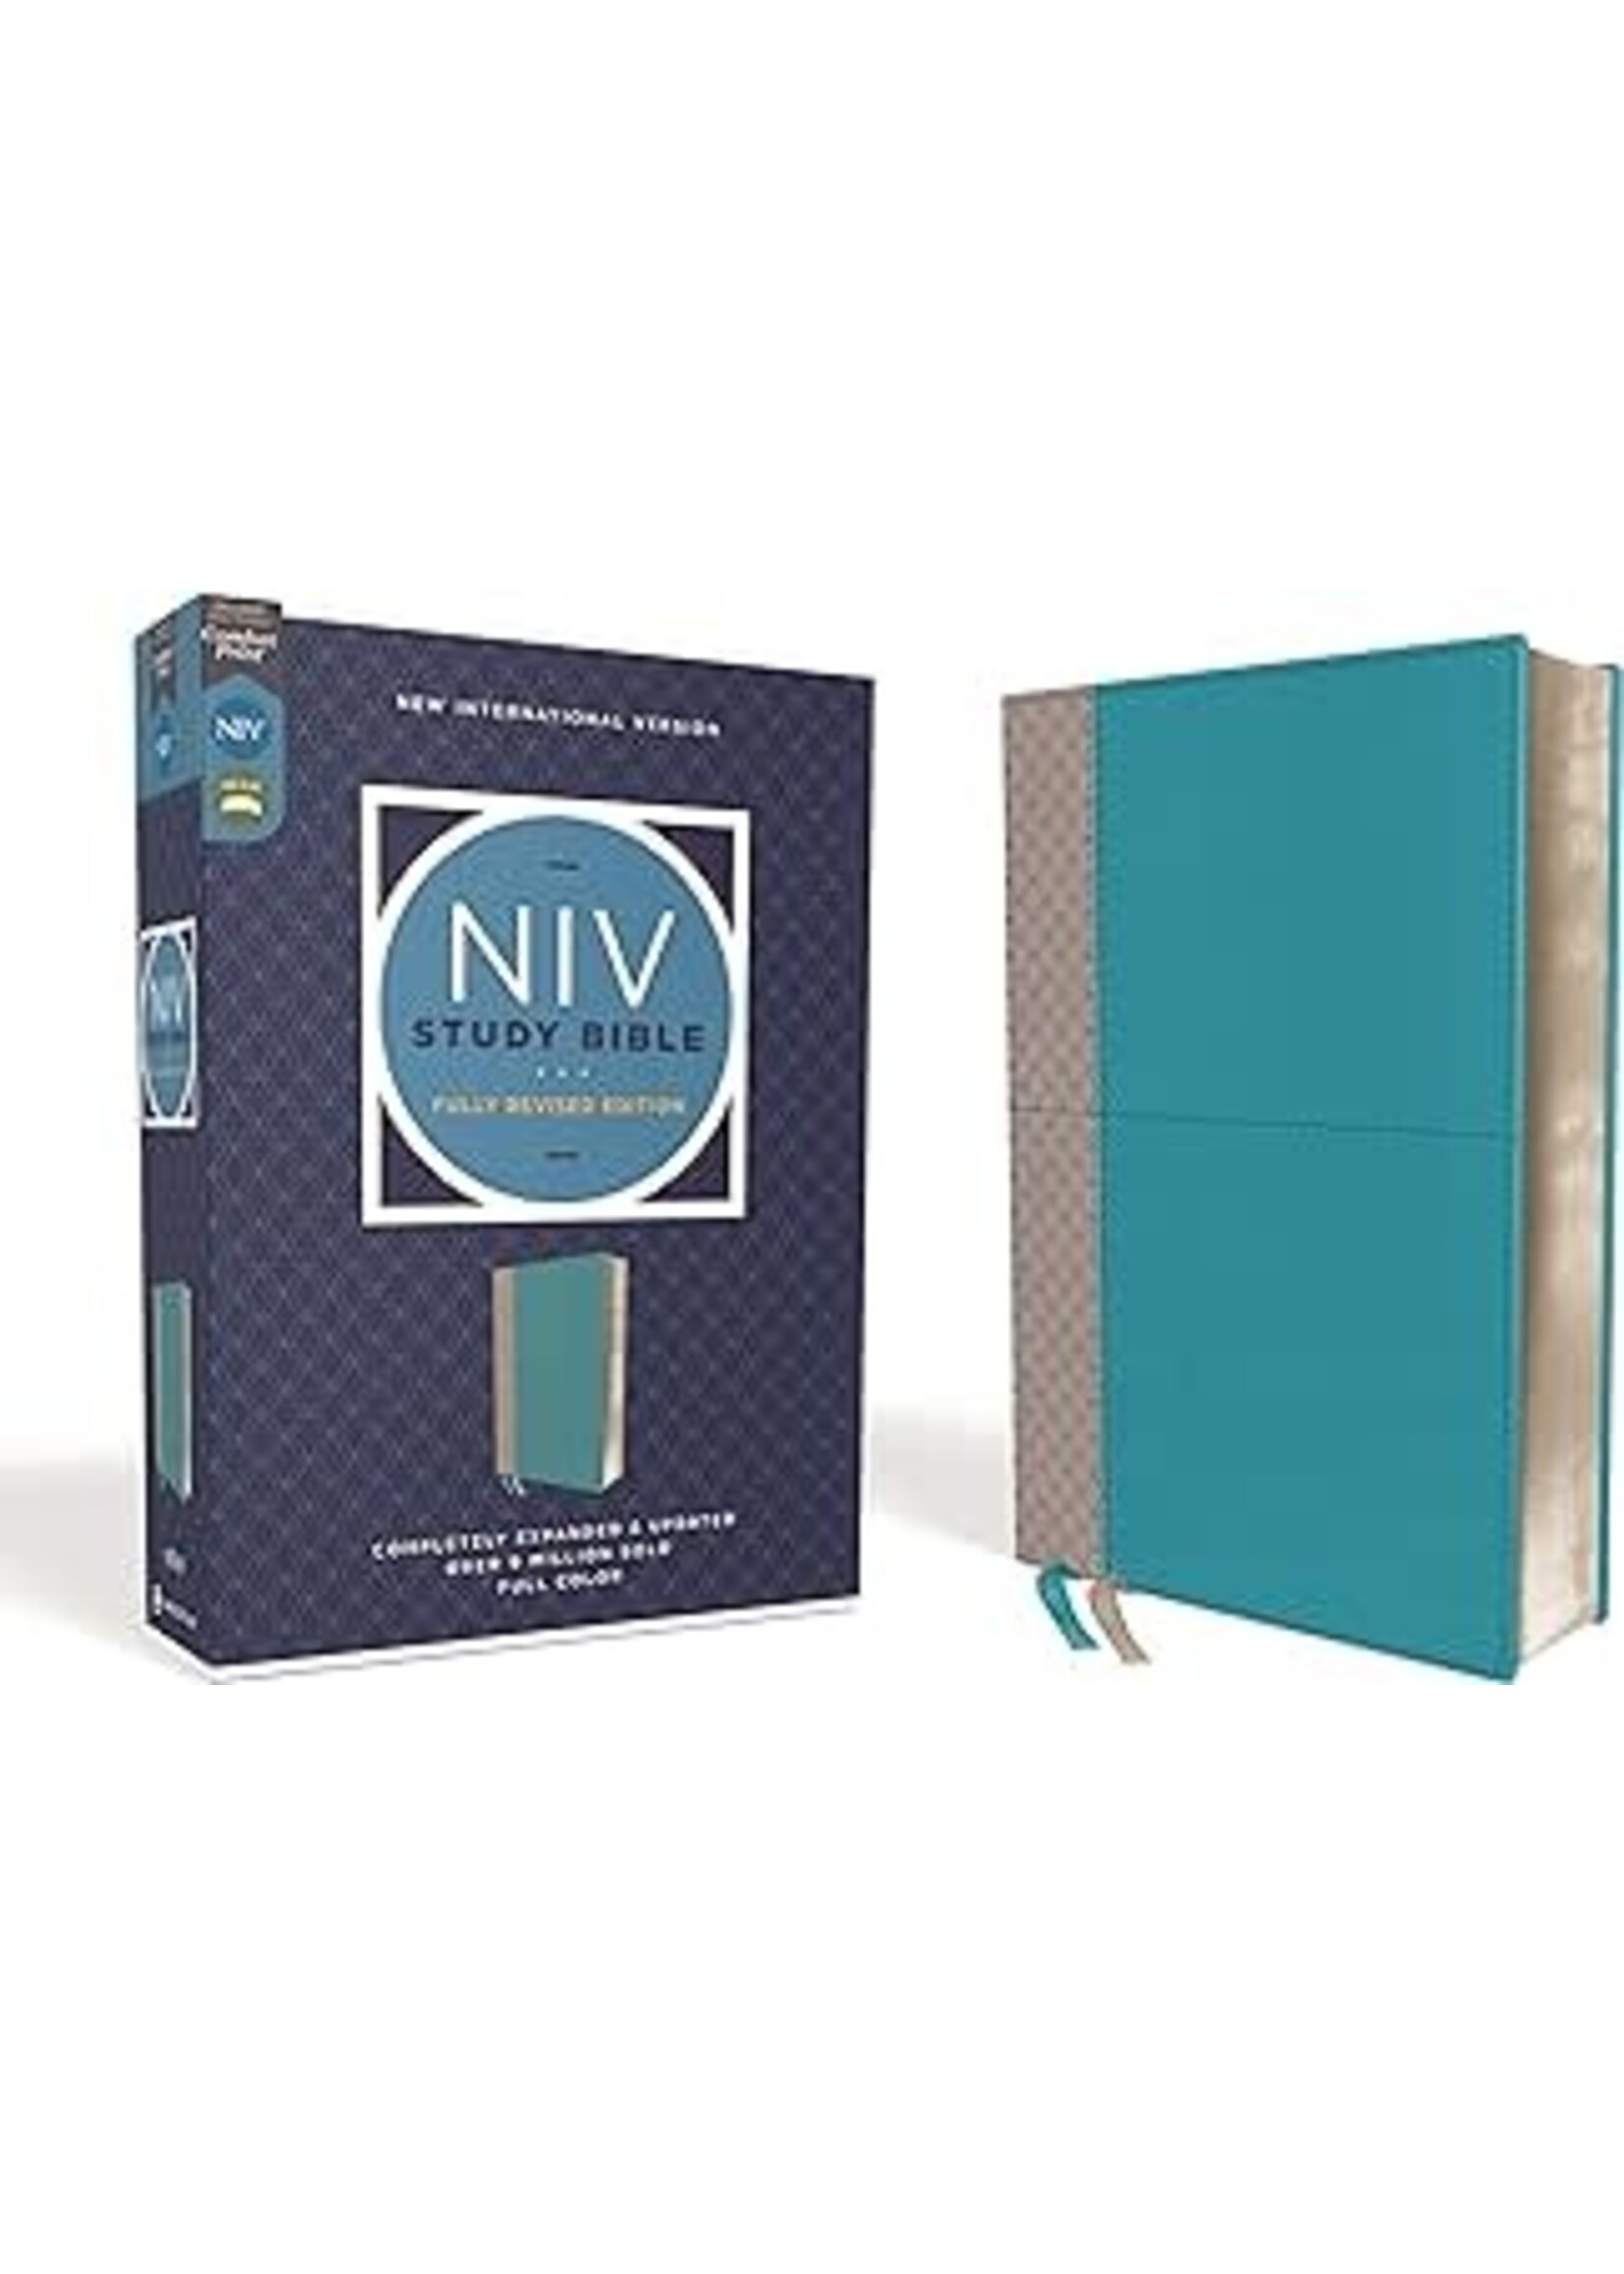 NIV Study Bible  Fully Revised Edition